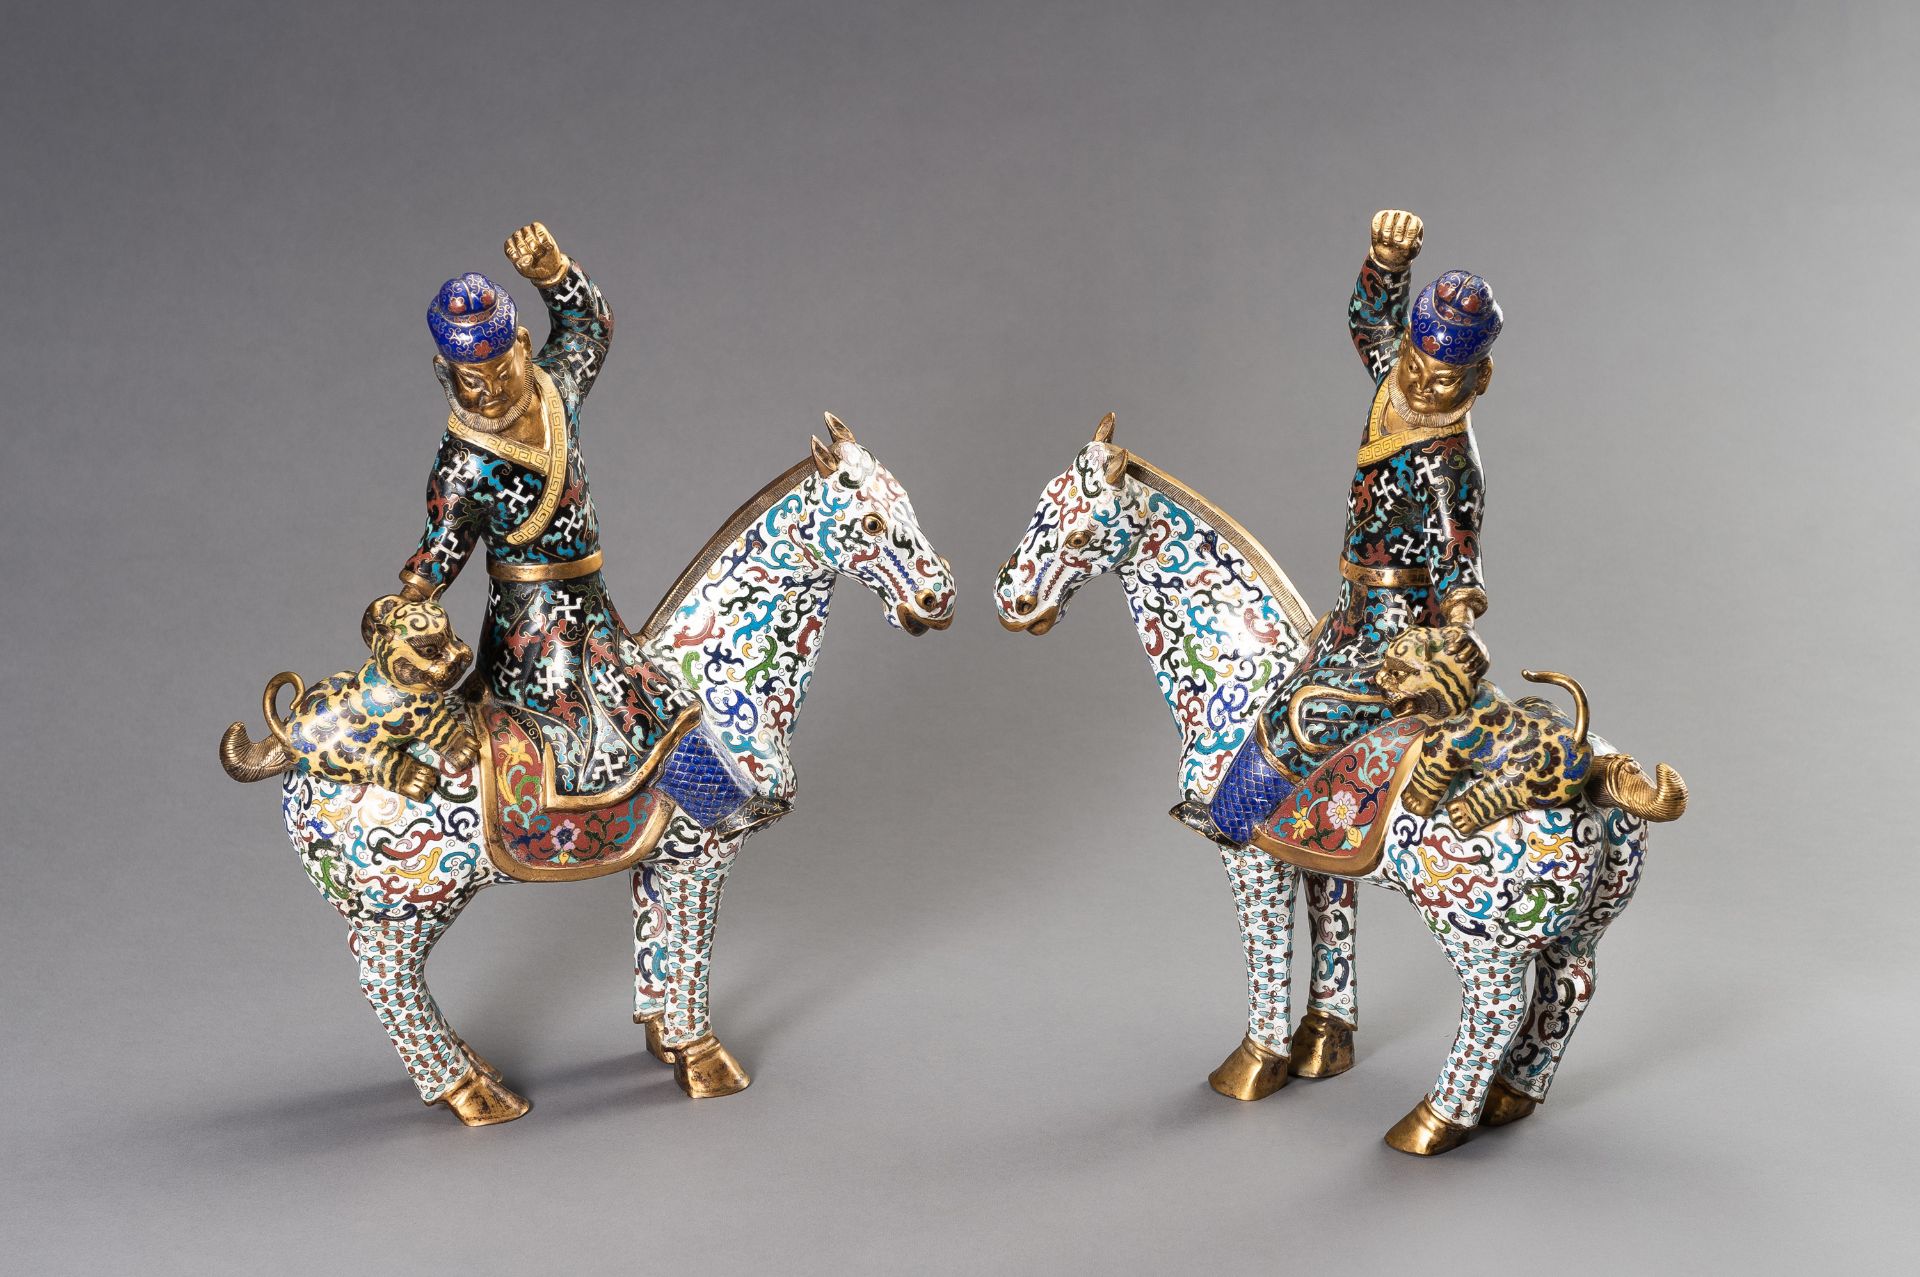 A PAIR OF CLOISONNE ENAMEL PERSIAN EQUESTRIANS, 20TH CENTURY - Image 7 of 12